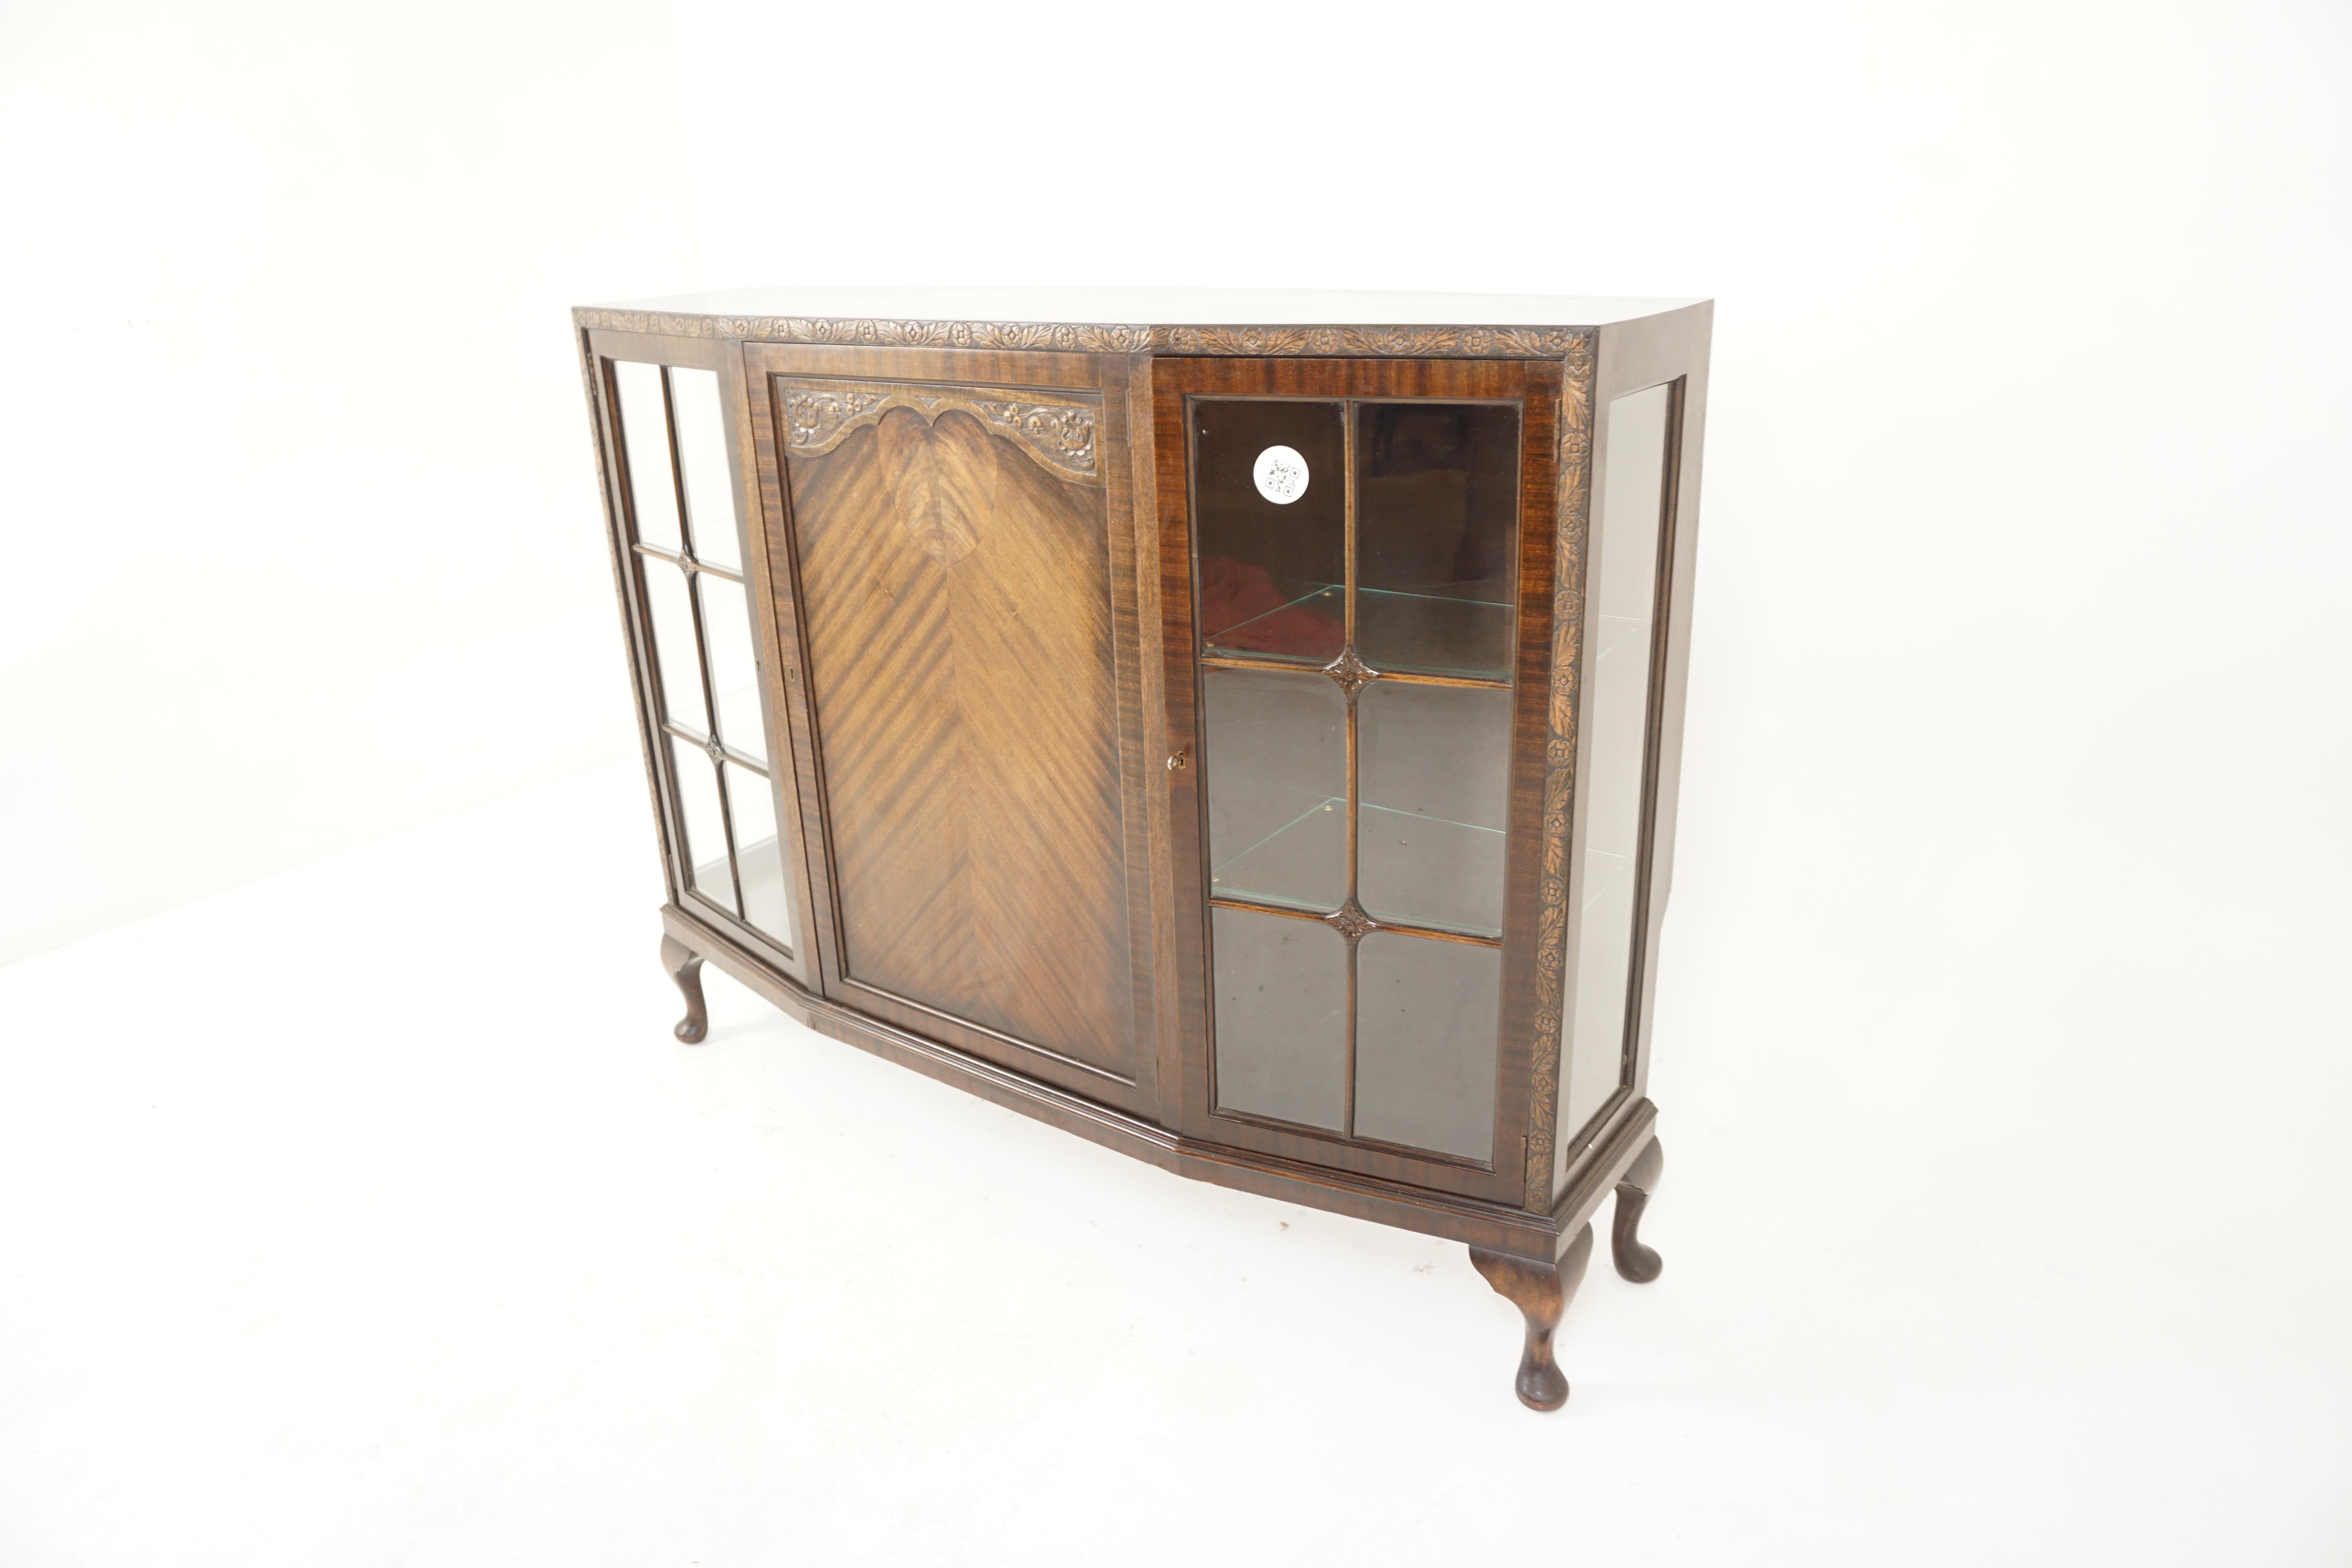 Art Deco Burr Walnut Three door display cabinet, China Cabinet, Scotland 1930, H789

Scotland 1930
Solid Walnut and Veneers
Original finish
Solid top with carved moulding on the front and running down the sides
Carved veneered central